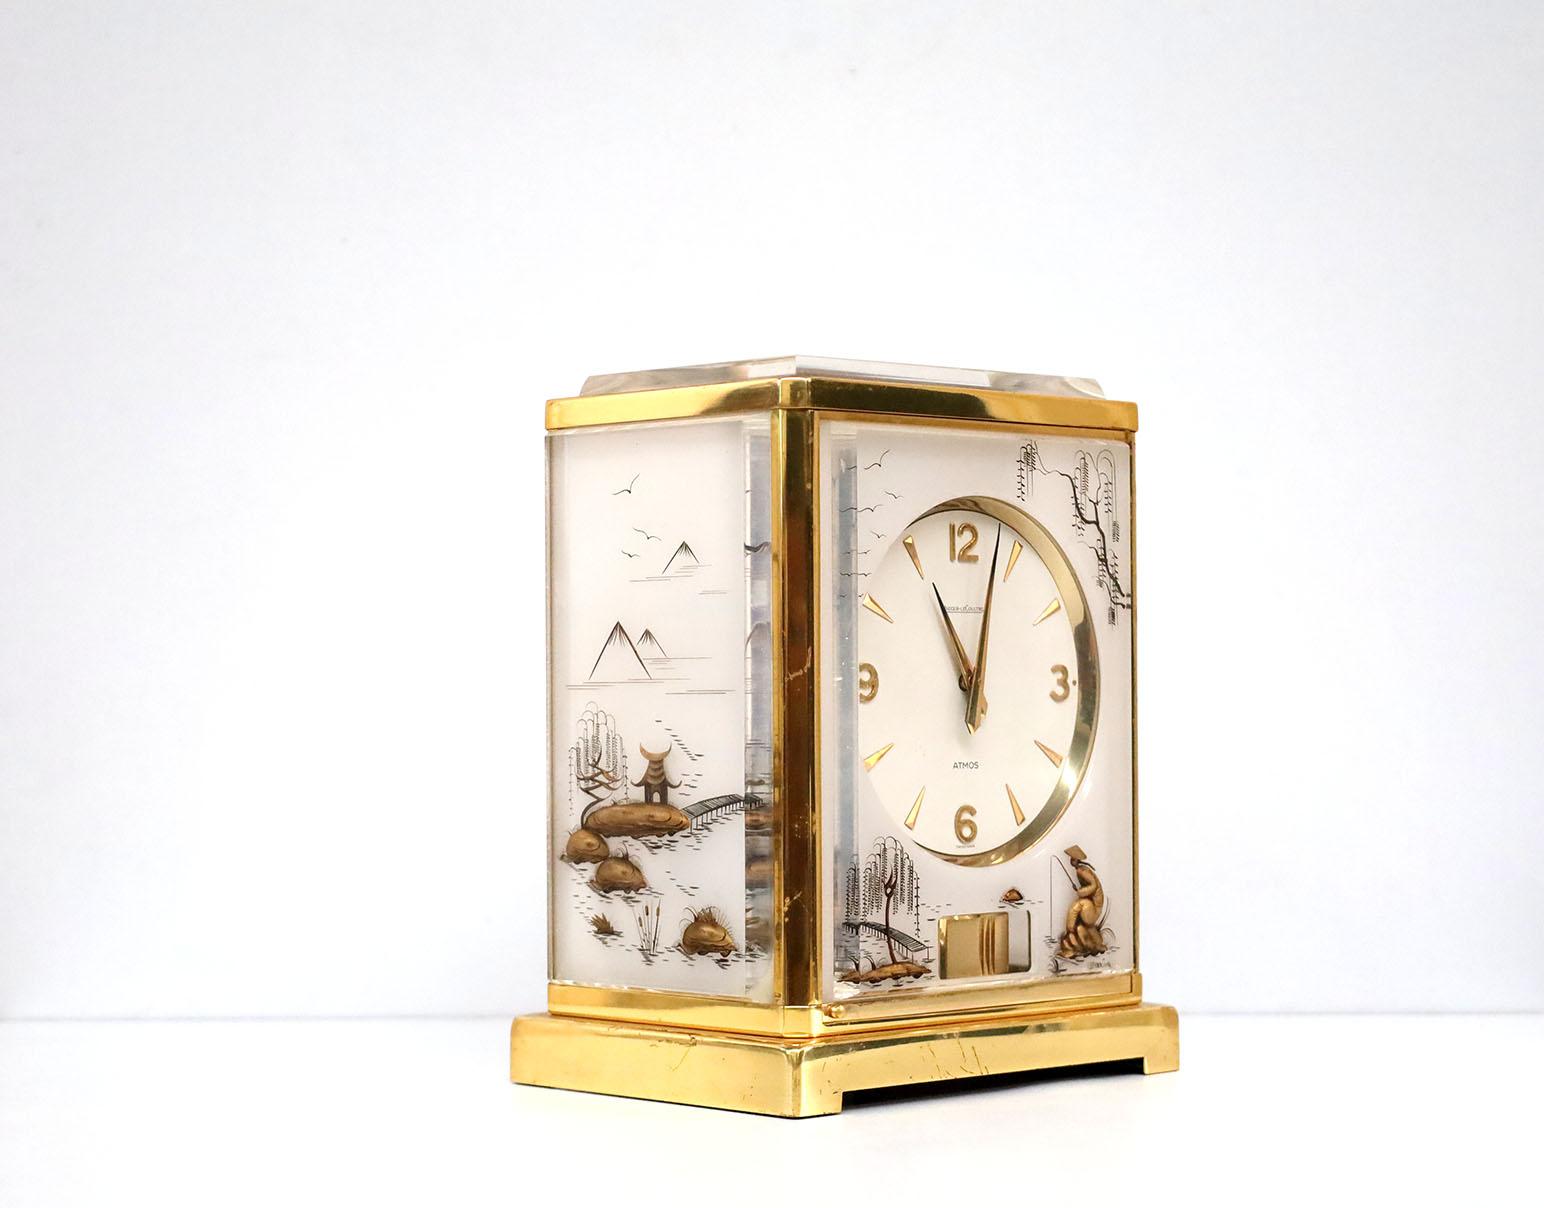 Jaeger-LeCoultre Atmos Clock with Chinoiserie Design In Good Condition For Sale In Mérida, YU